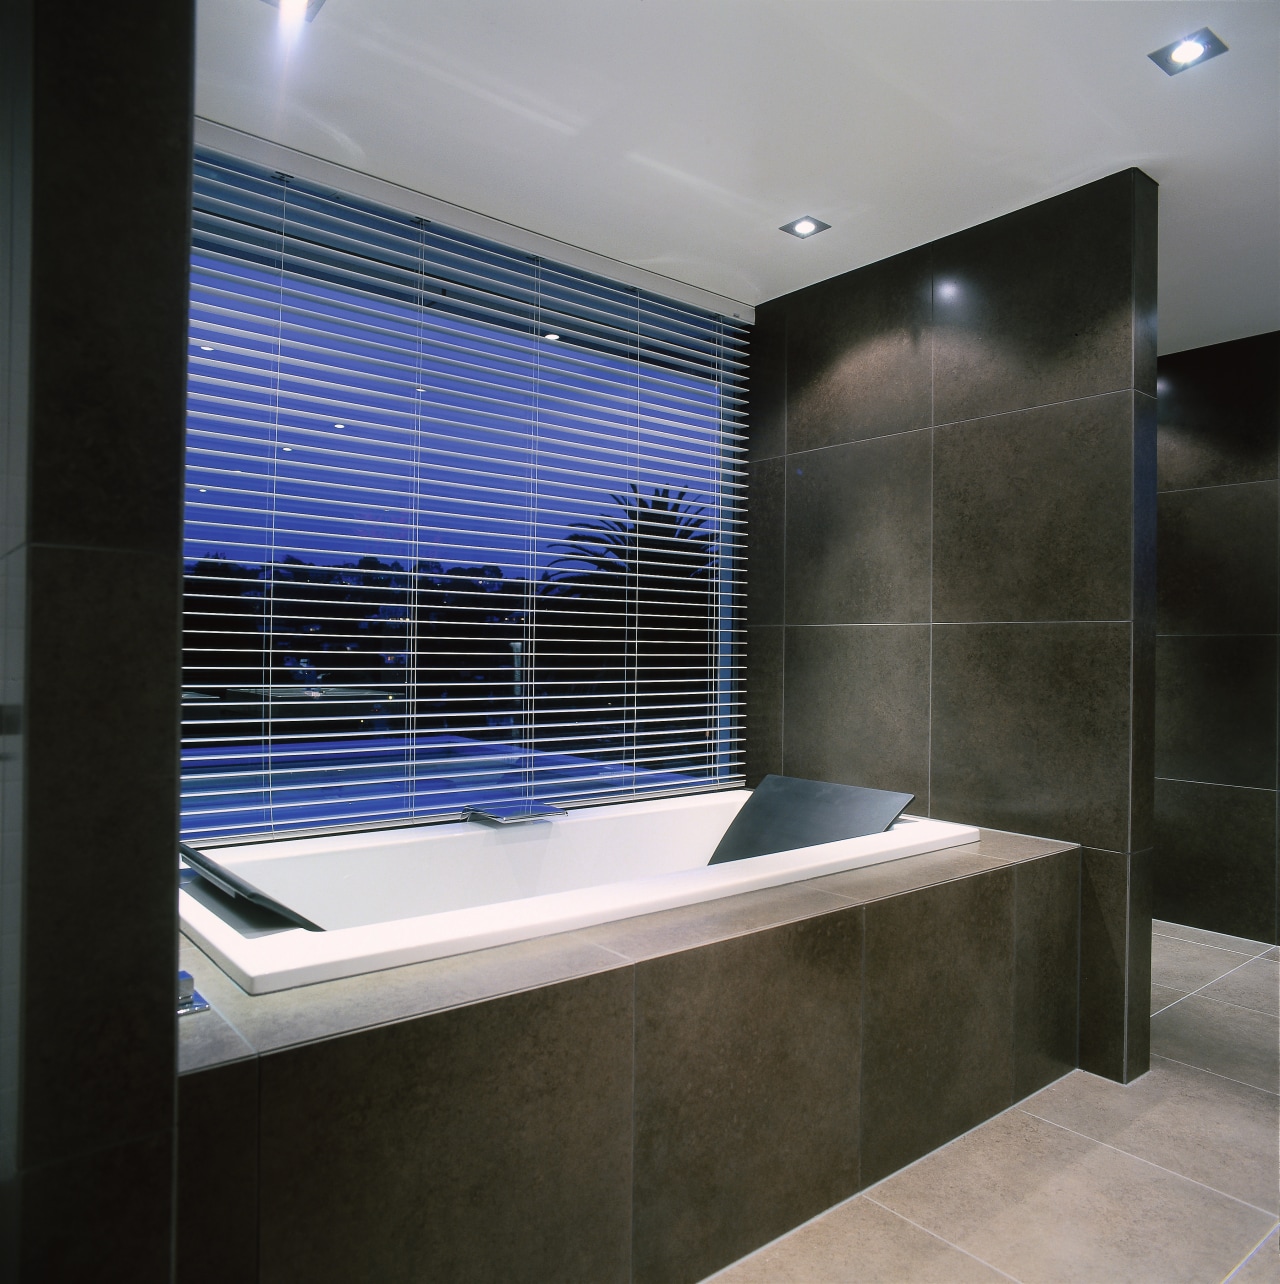 Image of a bathroom featuring plumbing work. architecture, bathroom, daylighting, glass, interior design, tile, black, gray